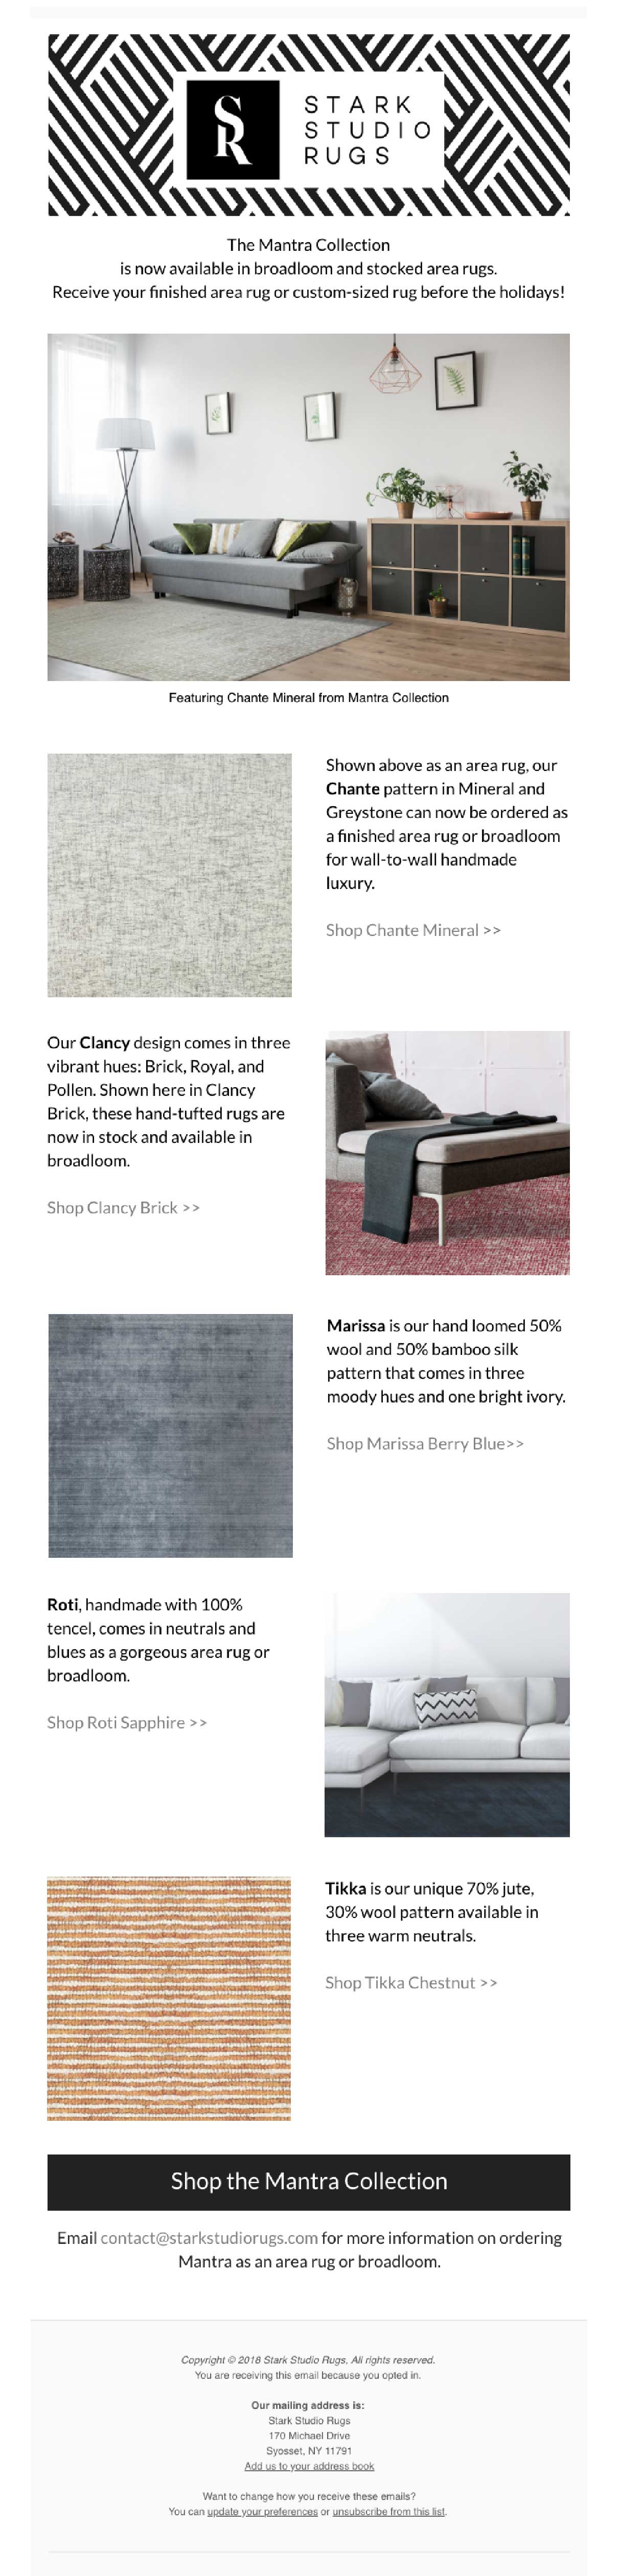 Stark Studio Rugs Post Now in Broadloom or Area Rug: Mantra Collection